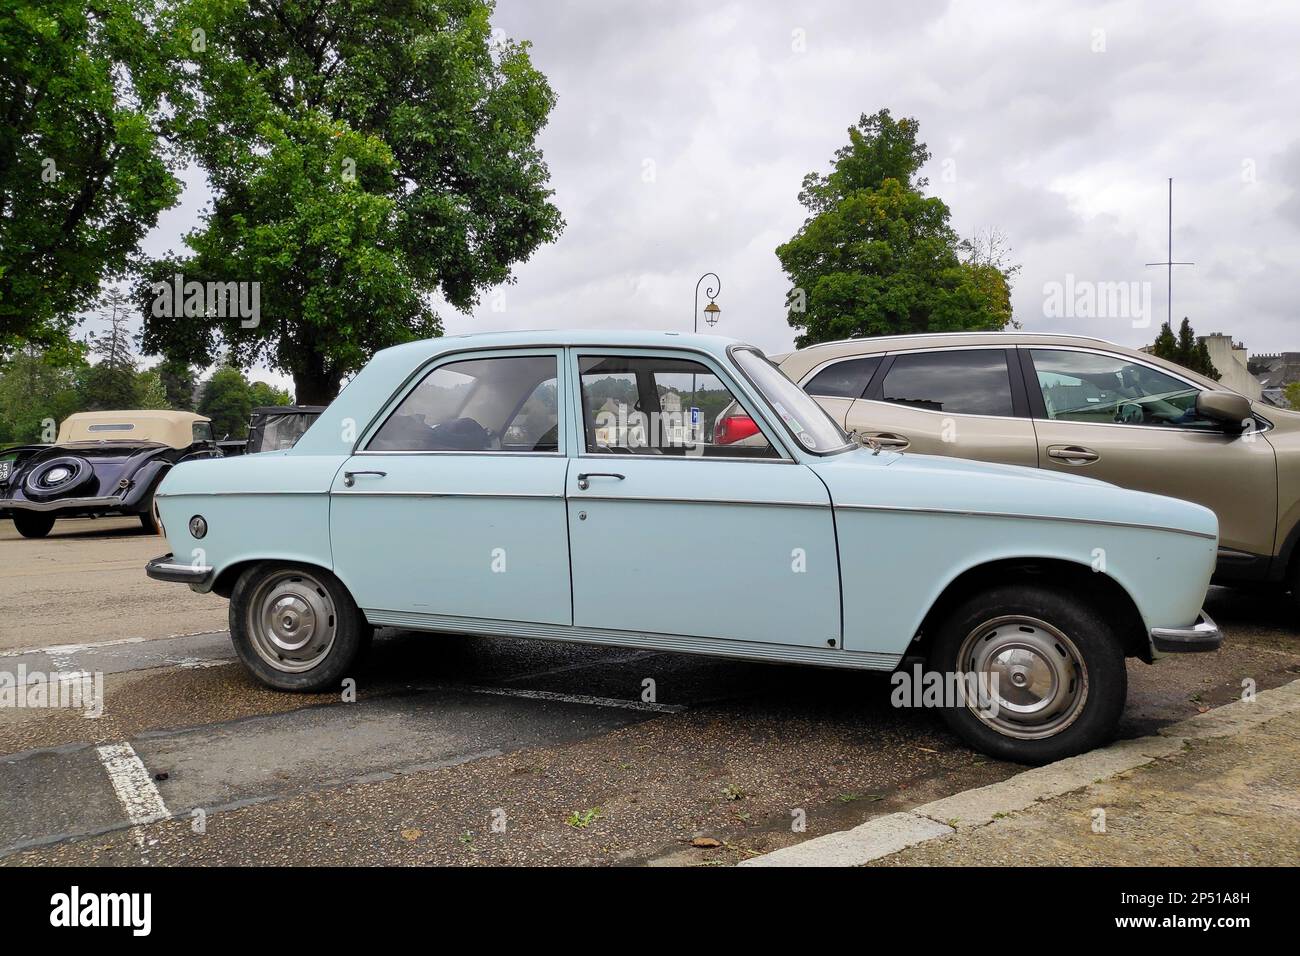 Huelgoat, France - September 09 2021: The Peugeot 204 is a small family car produced by the French manufacturer Peugeot between 1965 and 1976. Stock Photo